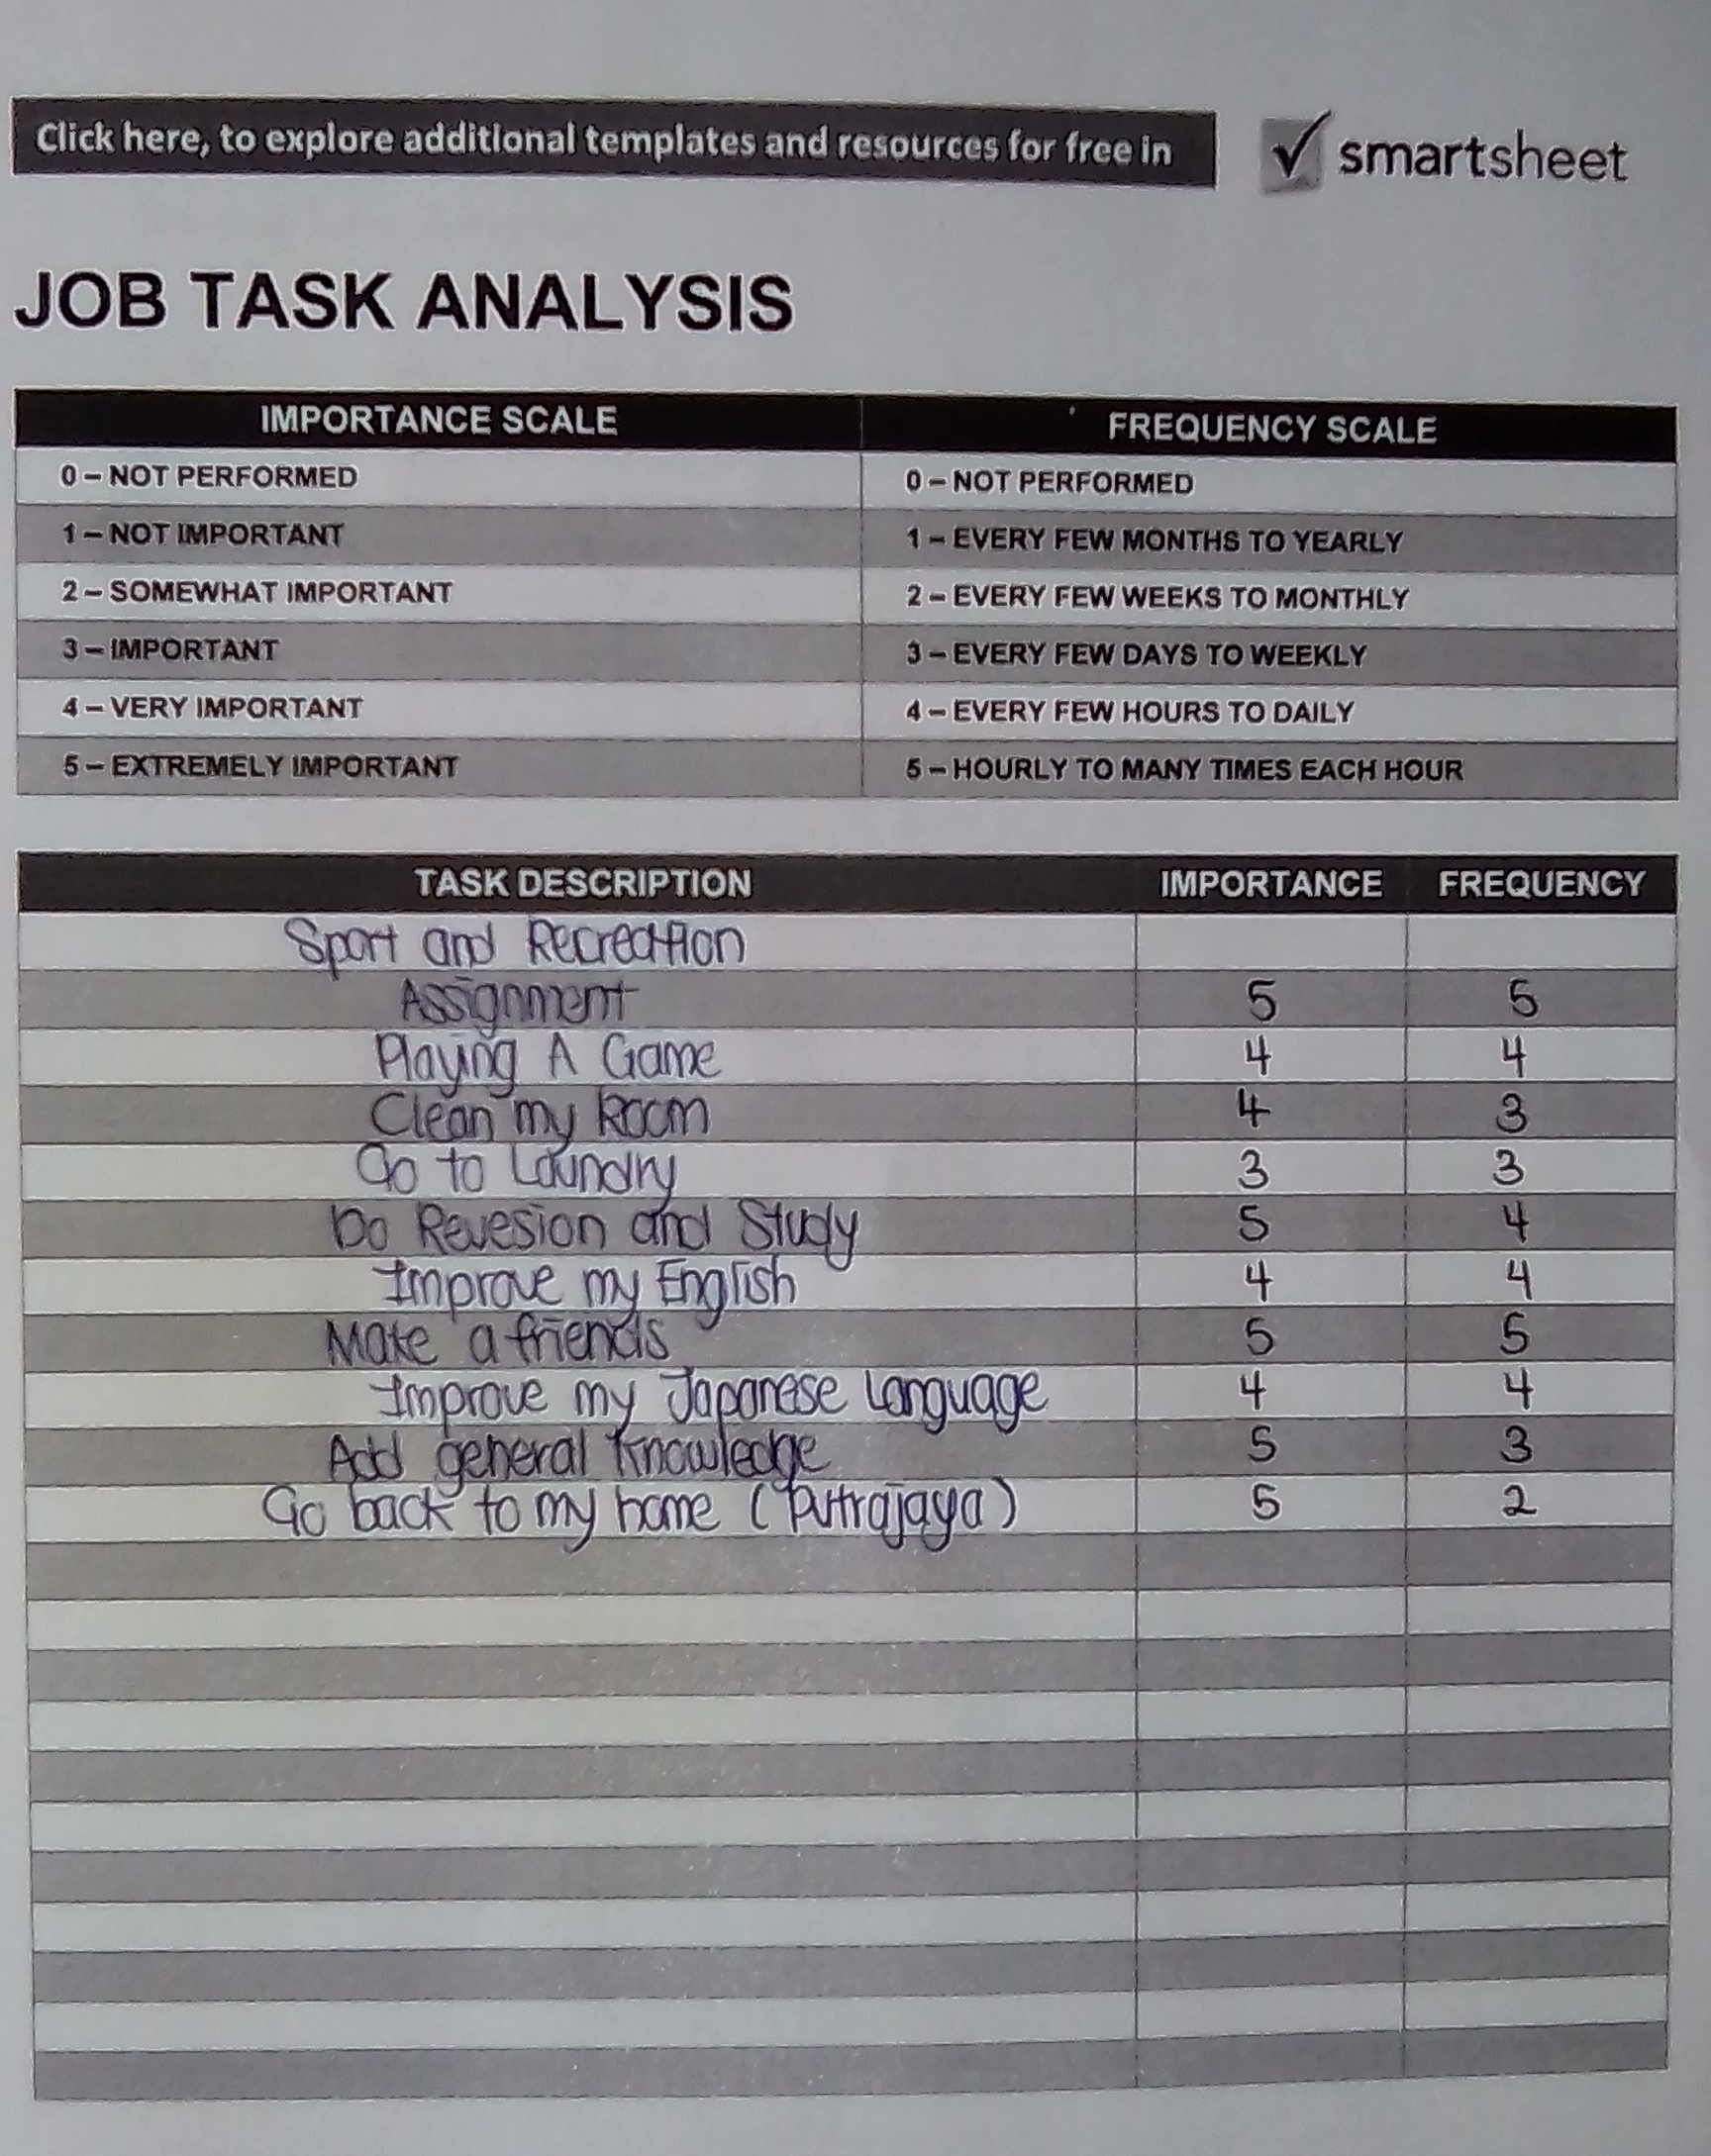 Ued 102 Uitm Assignments Business Study Ba111 Study Skills